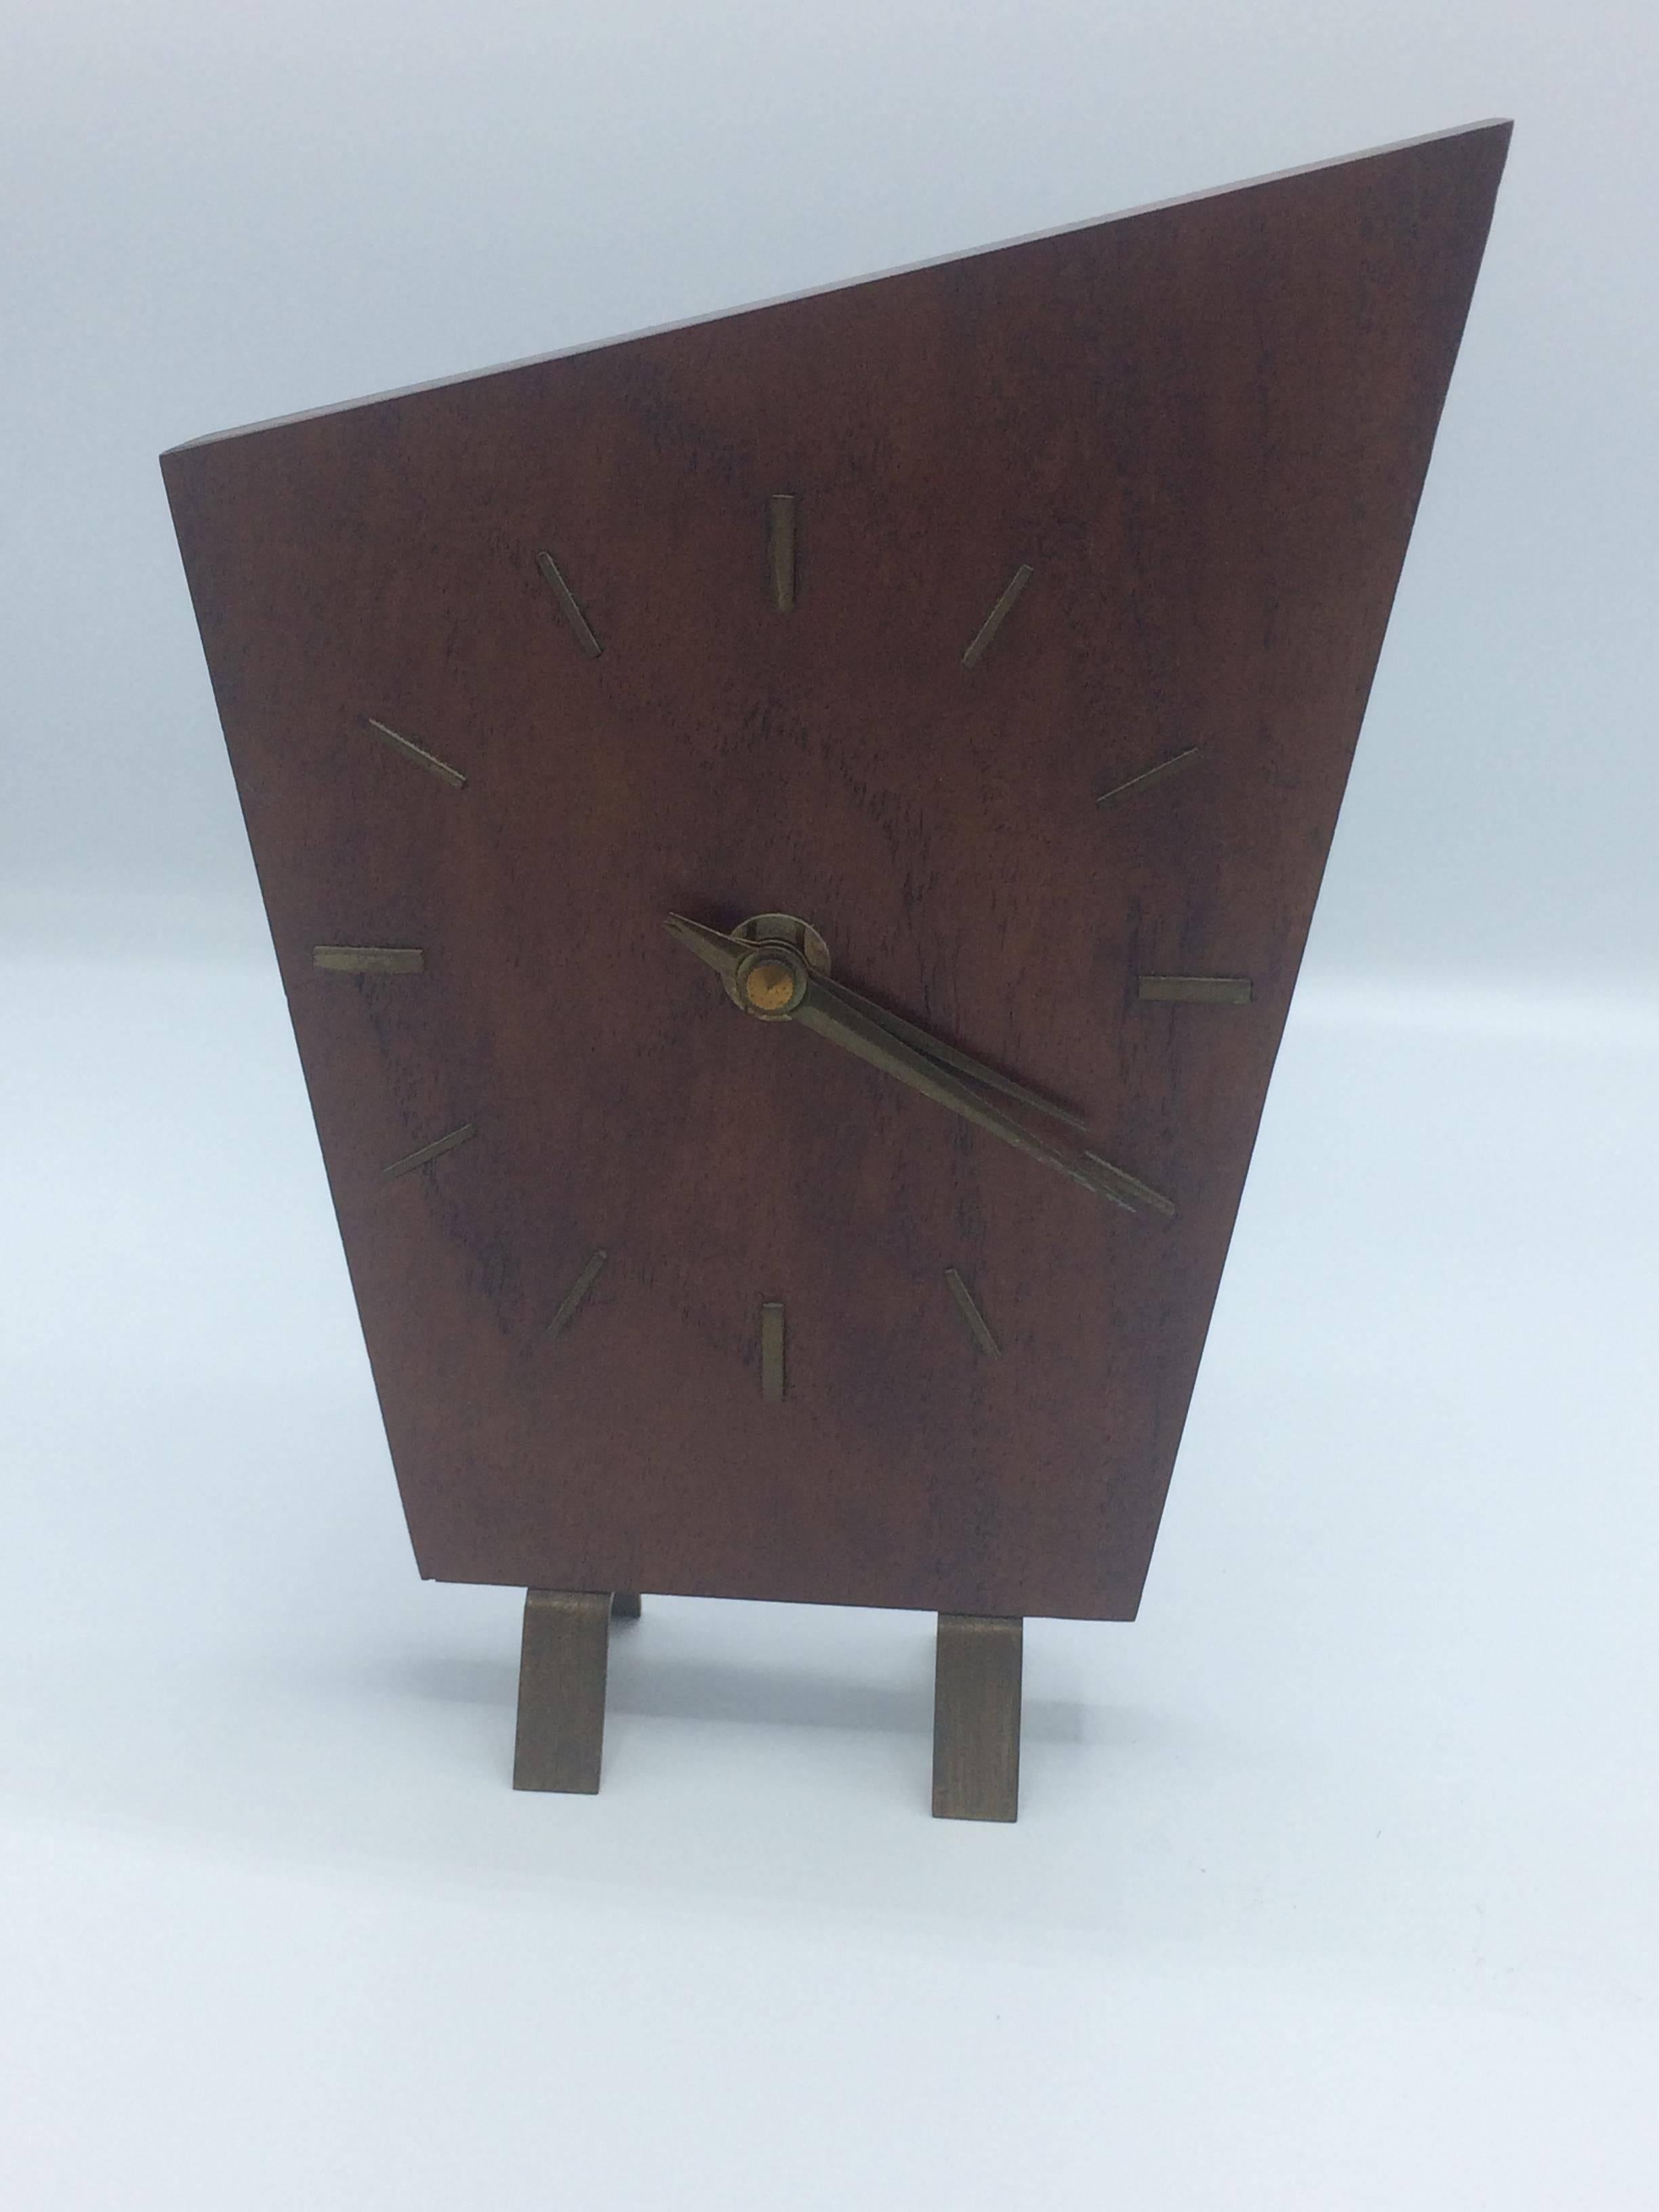 Gorgeous Minimalist table clock by Junghans in a warm dark wood. No Arabic numbers. Just the geometric form and the Mid-Century Modern feel. Wonderful piece. Full working condition, uses ready available batteries.